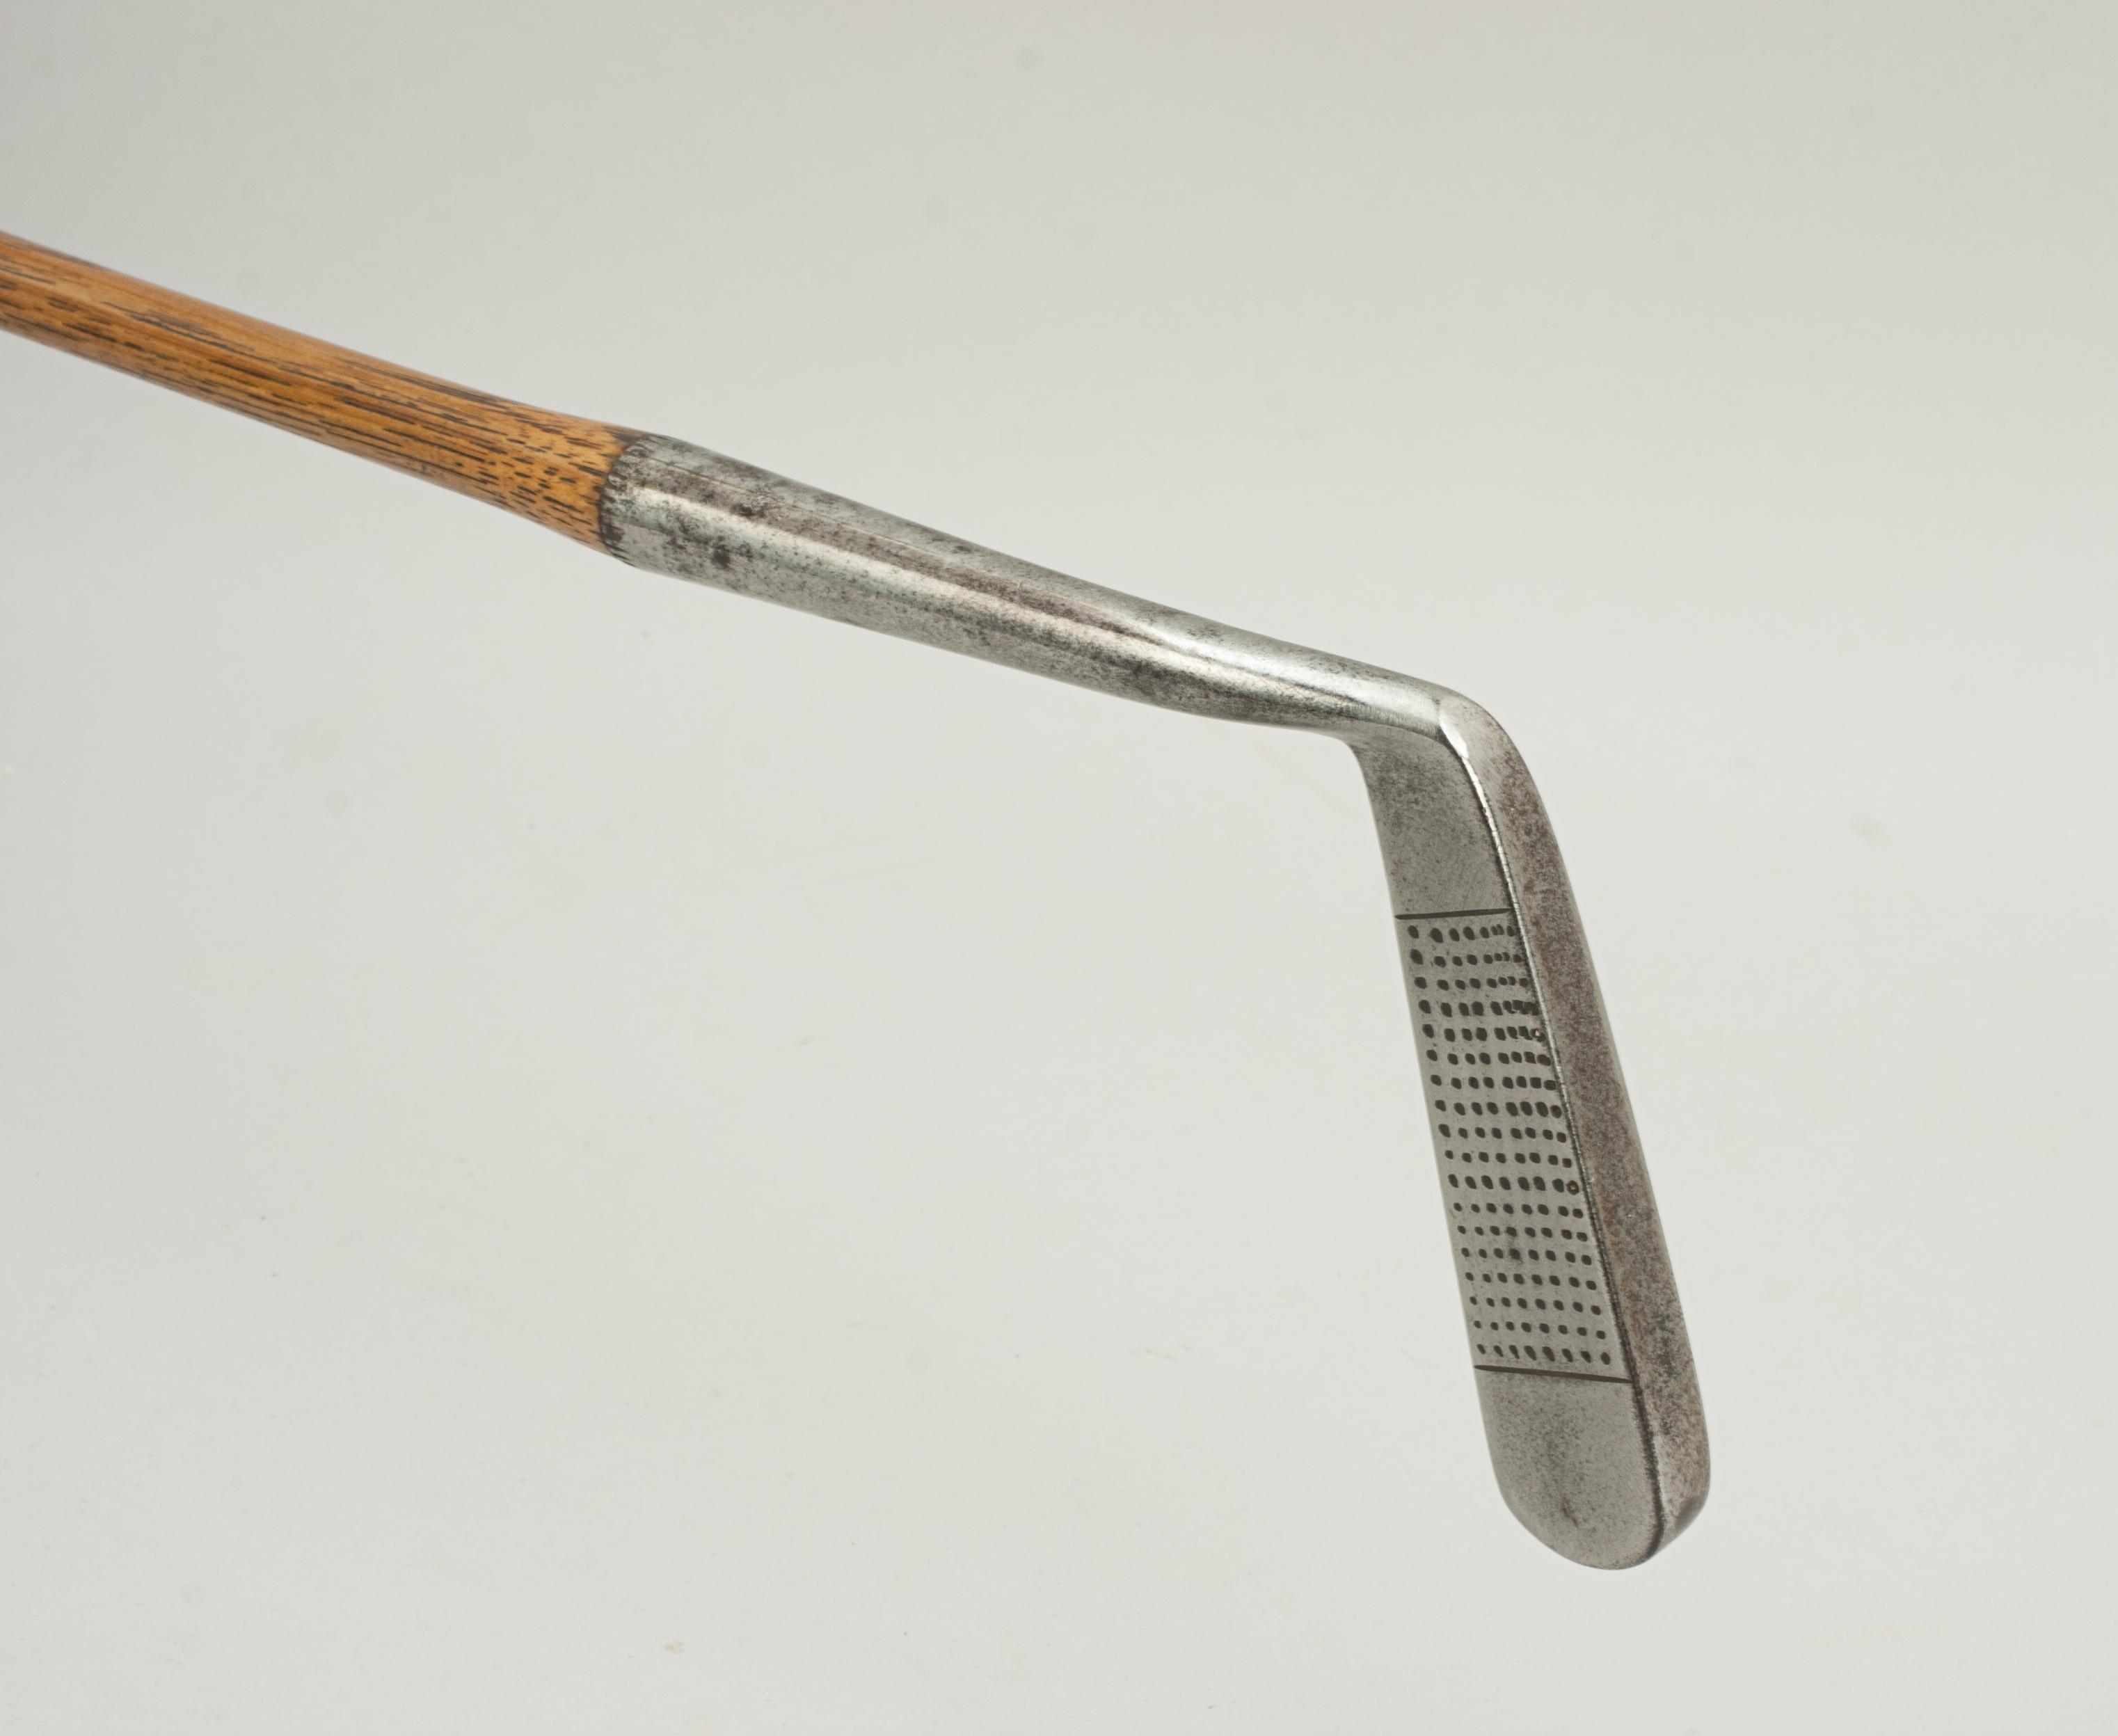 20th Century Vintage Golf Club, Putter by Cann & Taylor with J.h Taylor Autograph